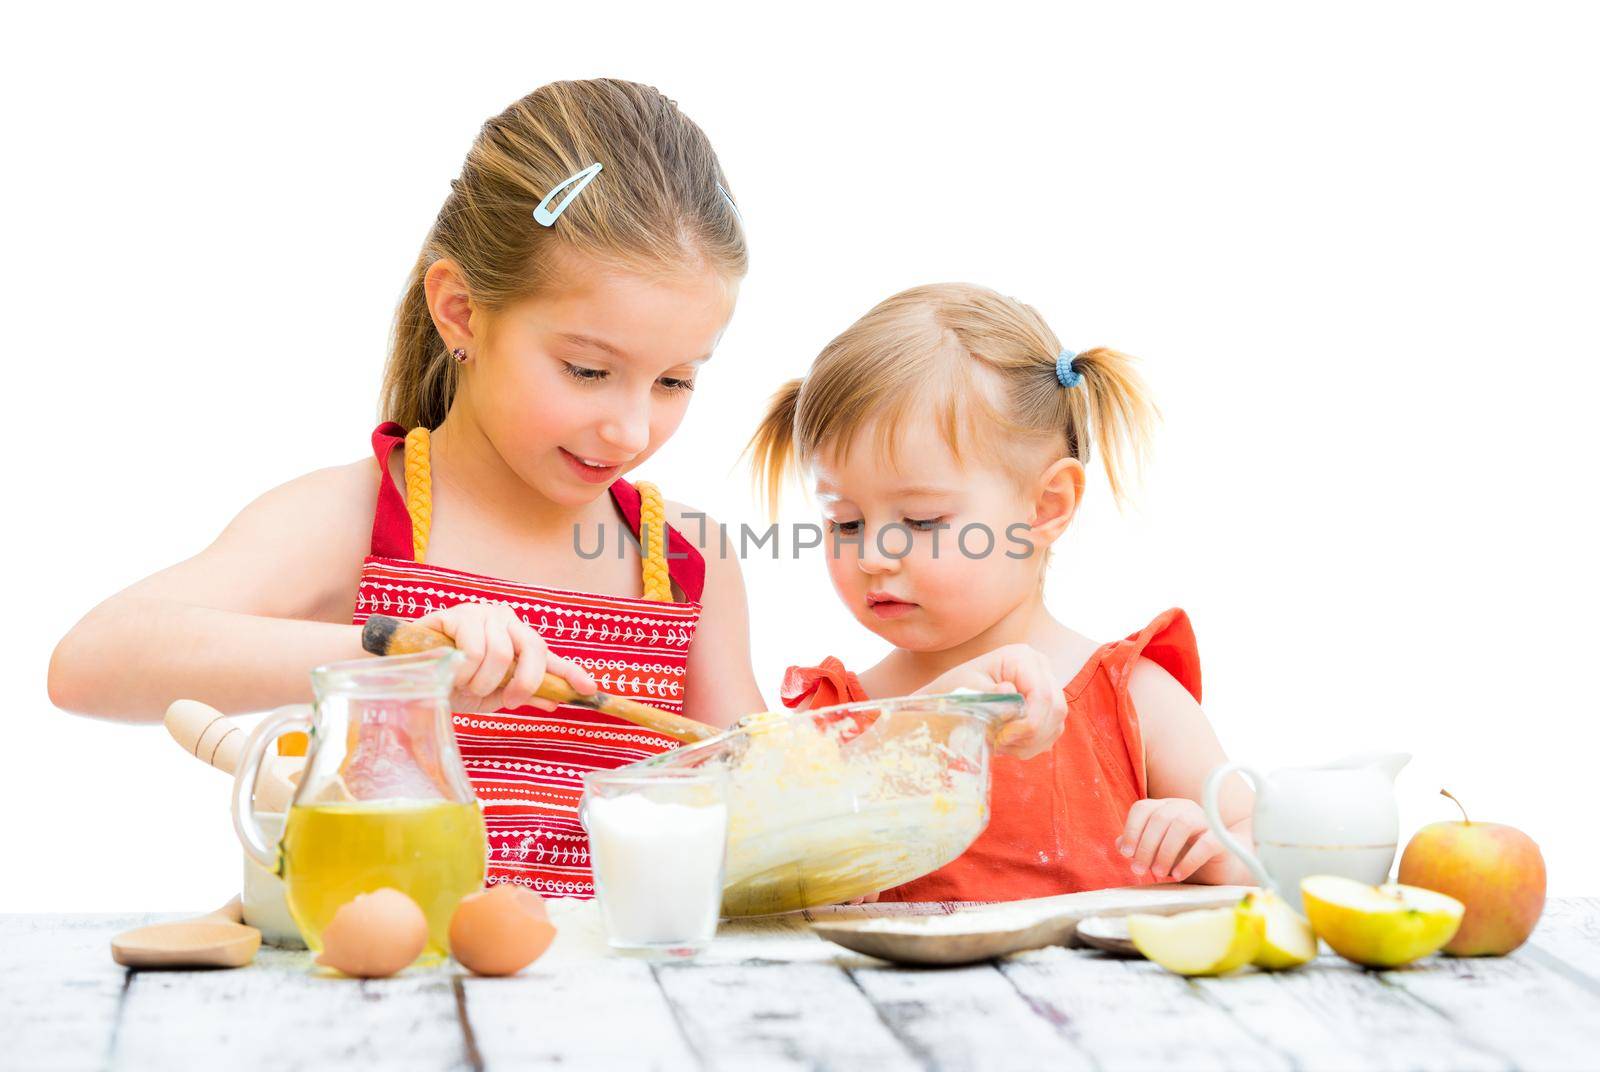 two cute little sisters baking on a white background